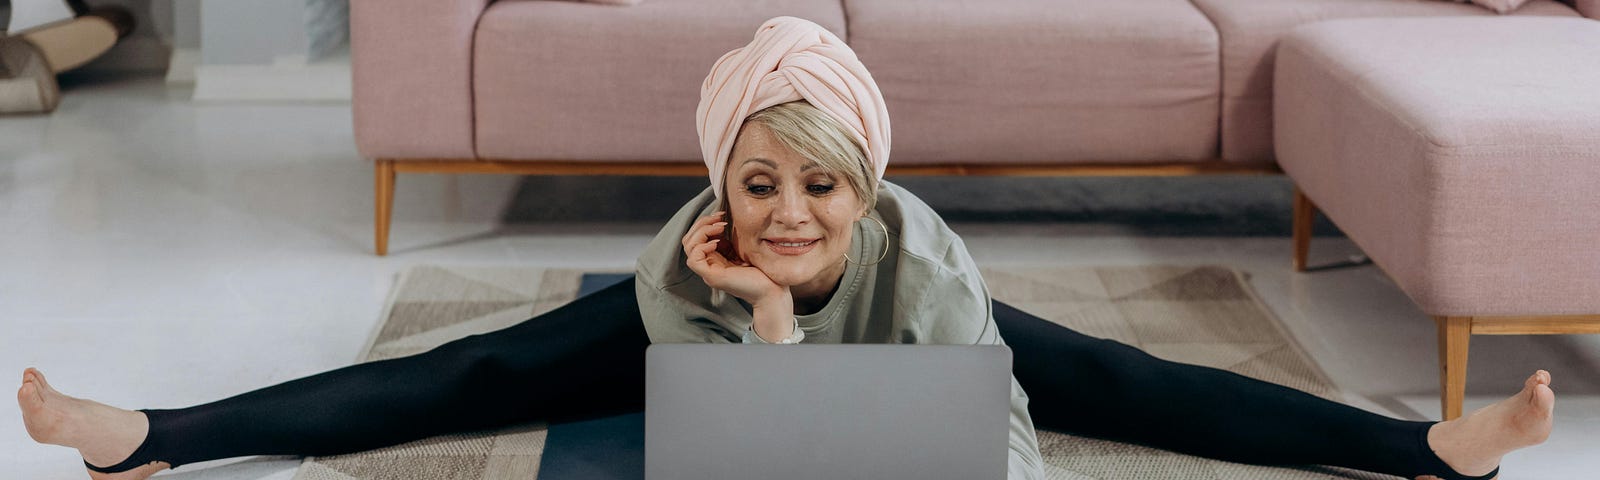 A senior woman since on the carpet in front of a pink lounge she is doing the splits while looking at her computer. She has a pink scarf on her head.